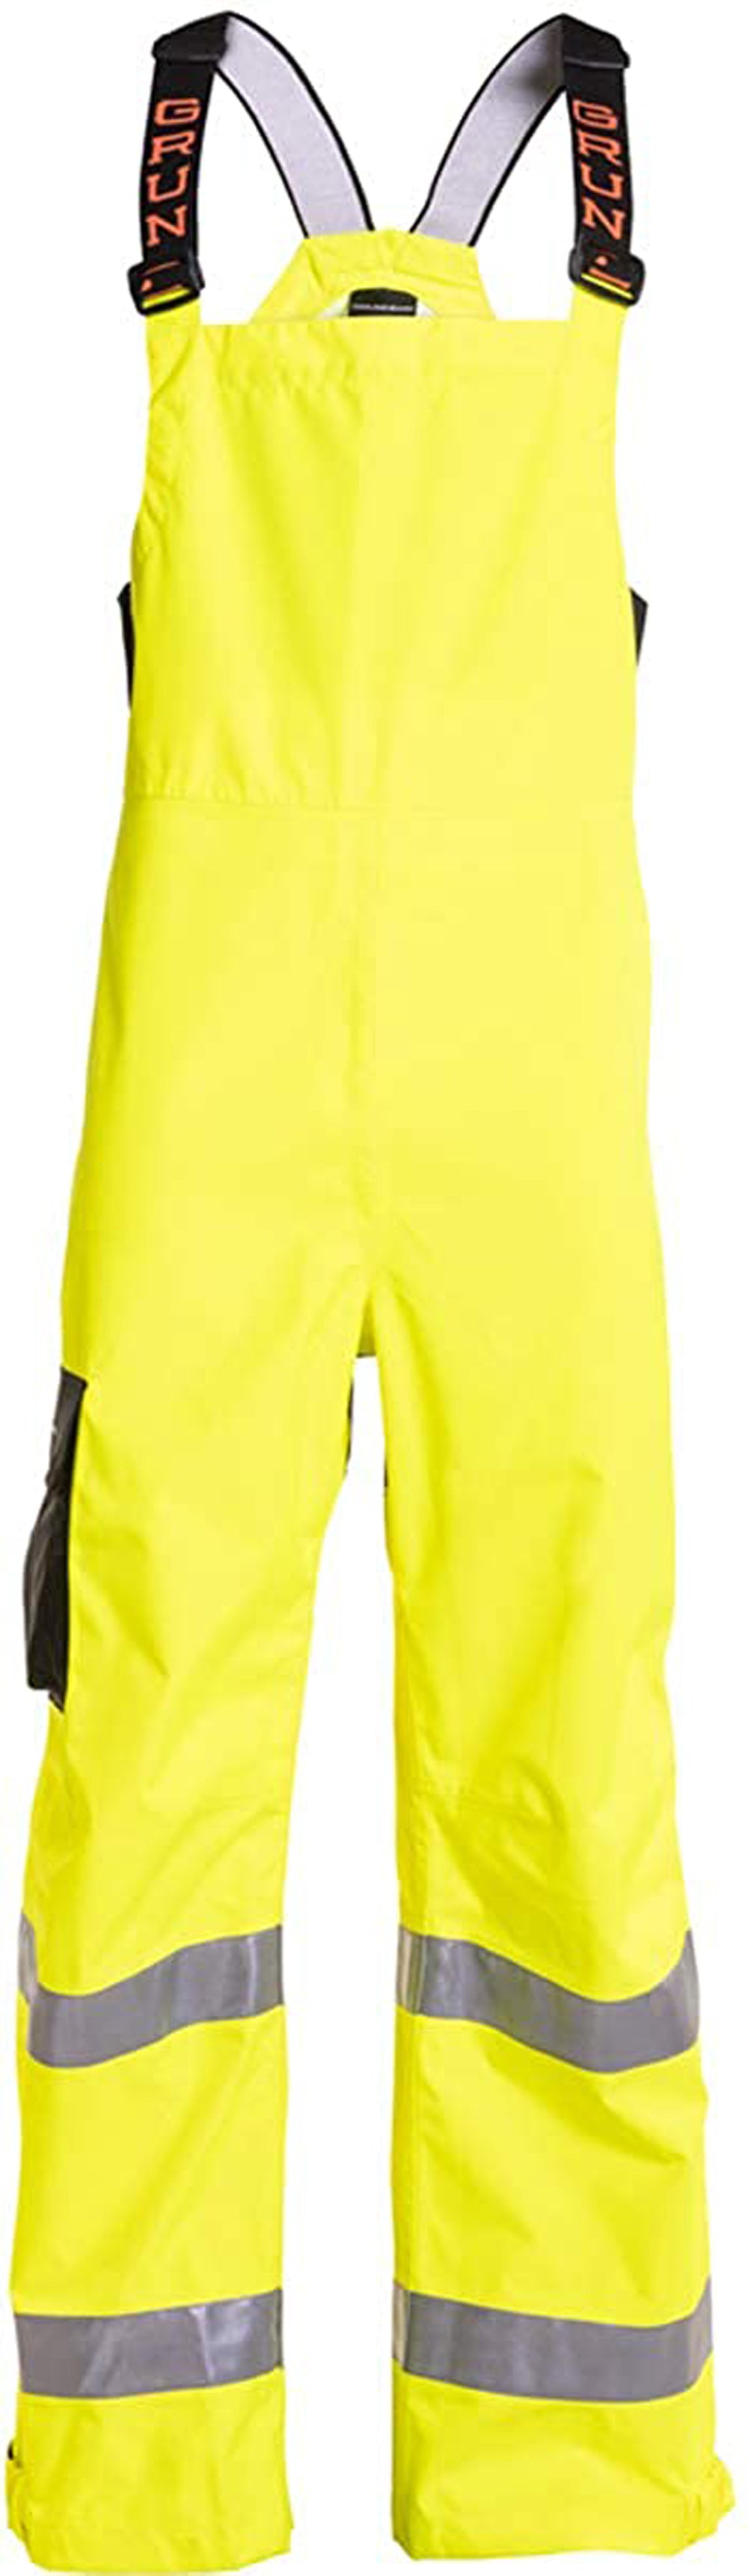 Weather Watch Bib in Reflective Yellow color